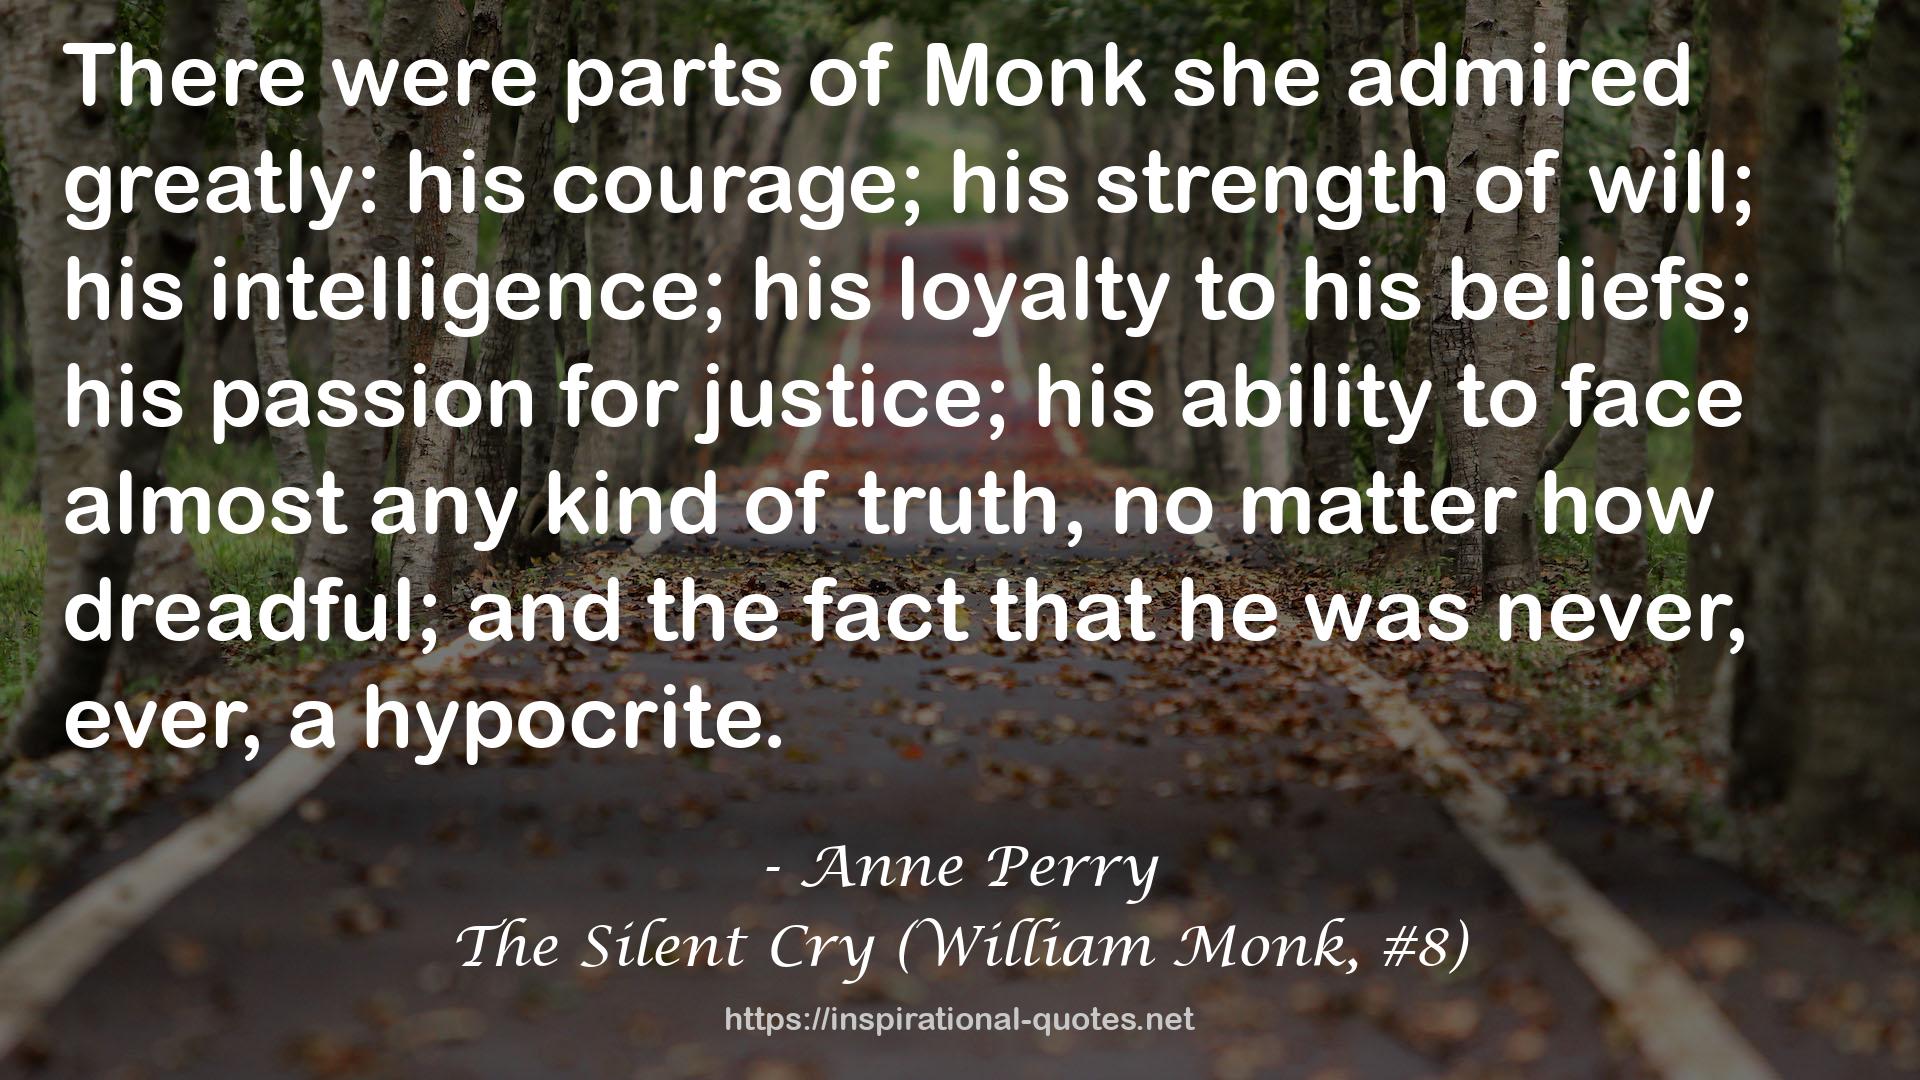 The Silent Cry (William Monk, #8) QUOTES